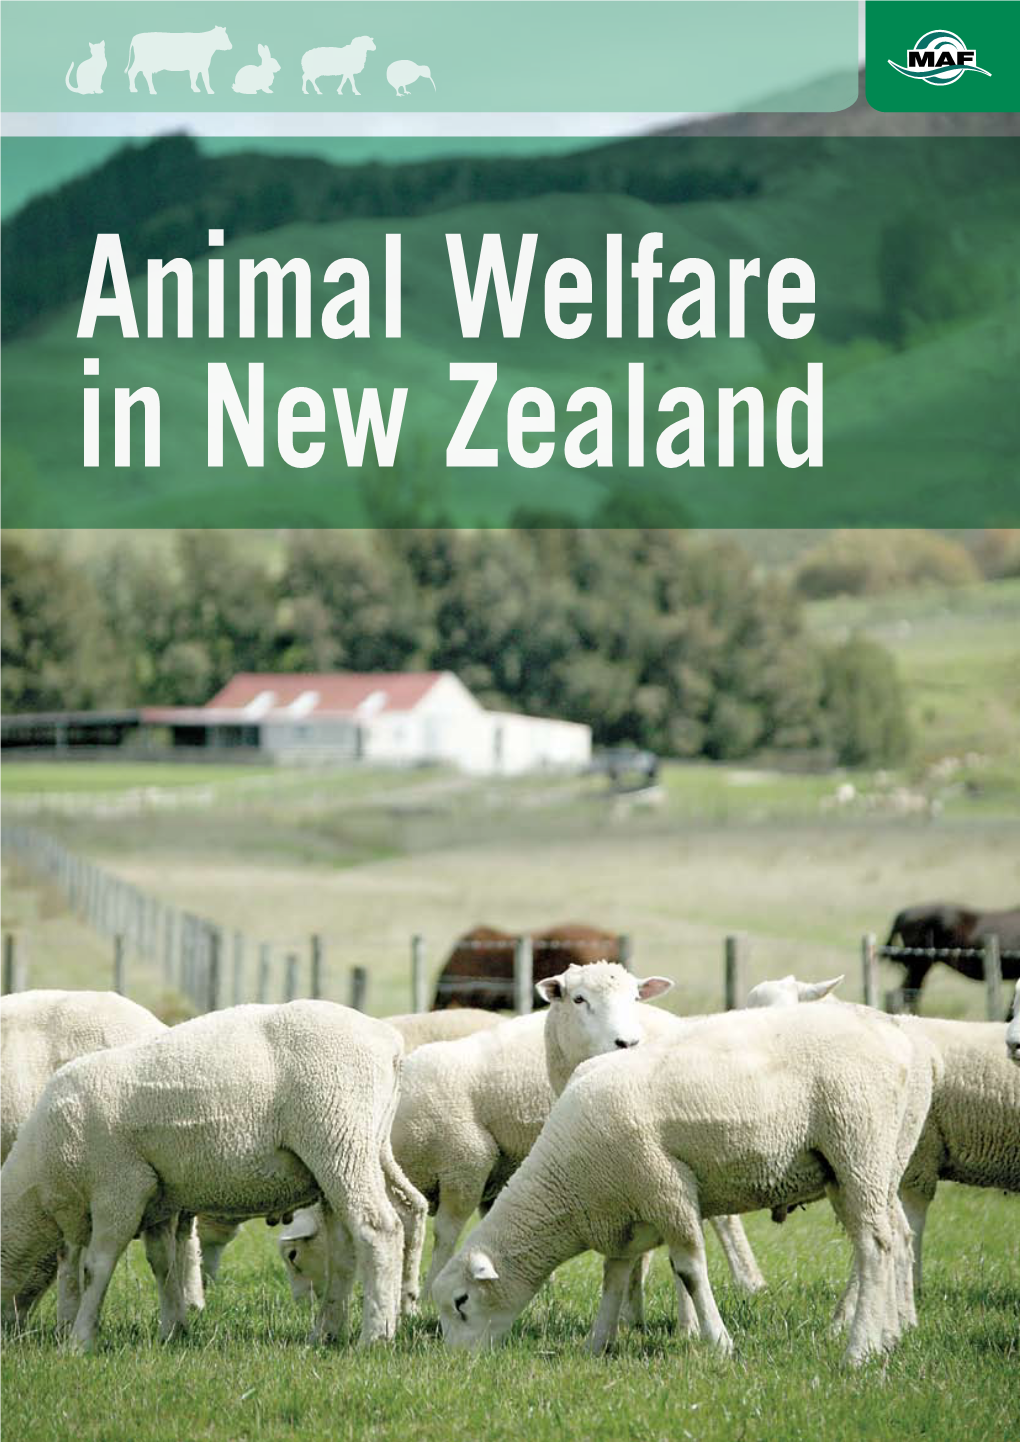 Animal Welfare in New Zealand Ministry of Agriculture and Forestry’S Animal Welfare Mission